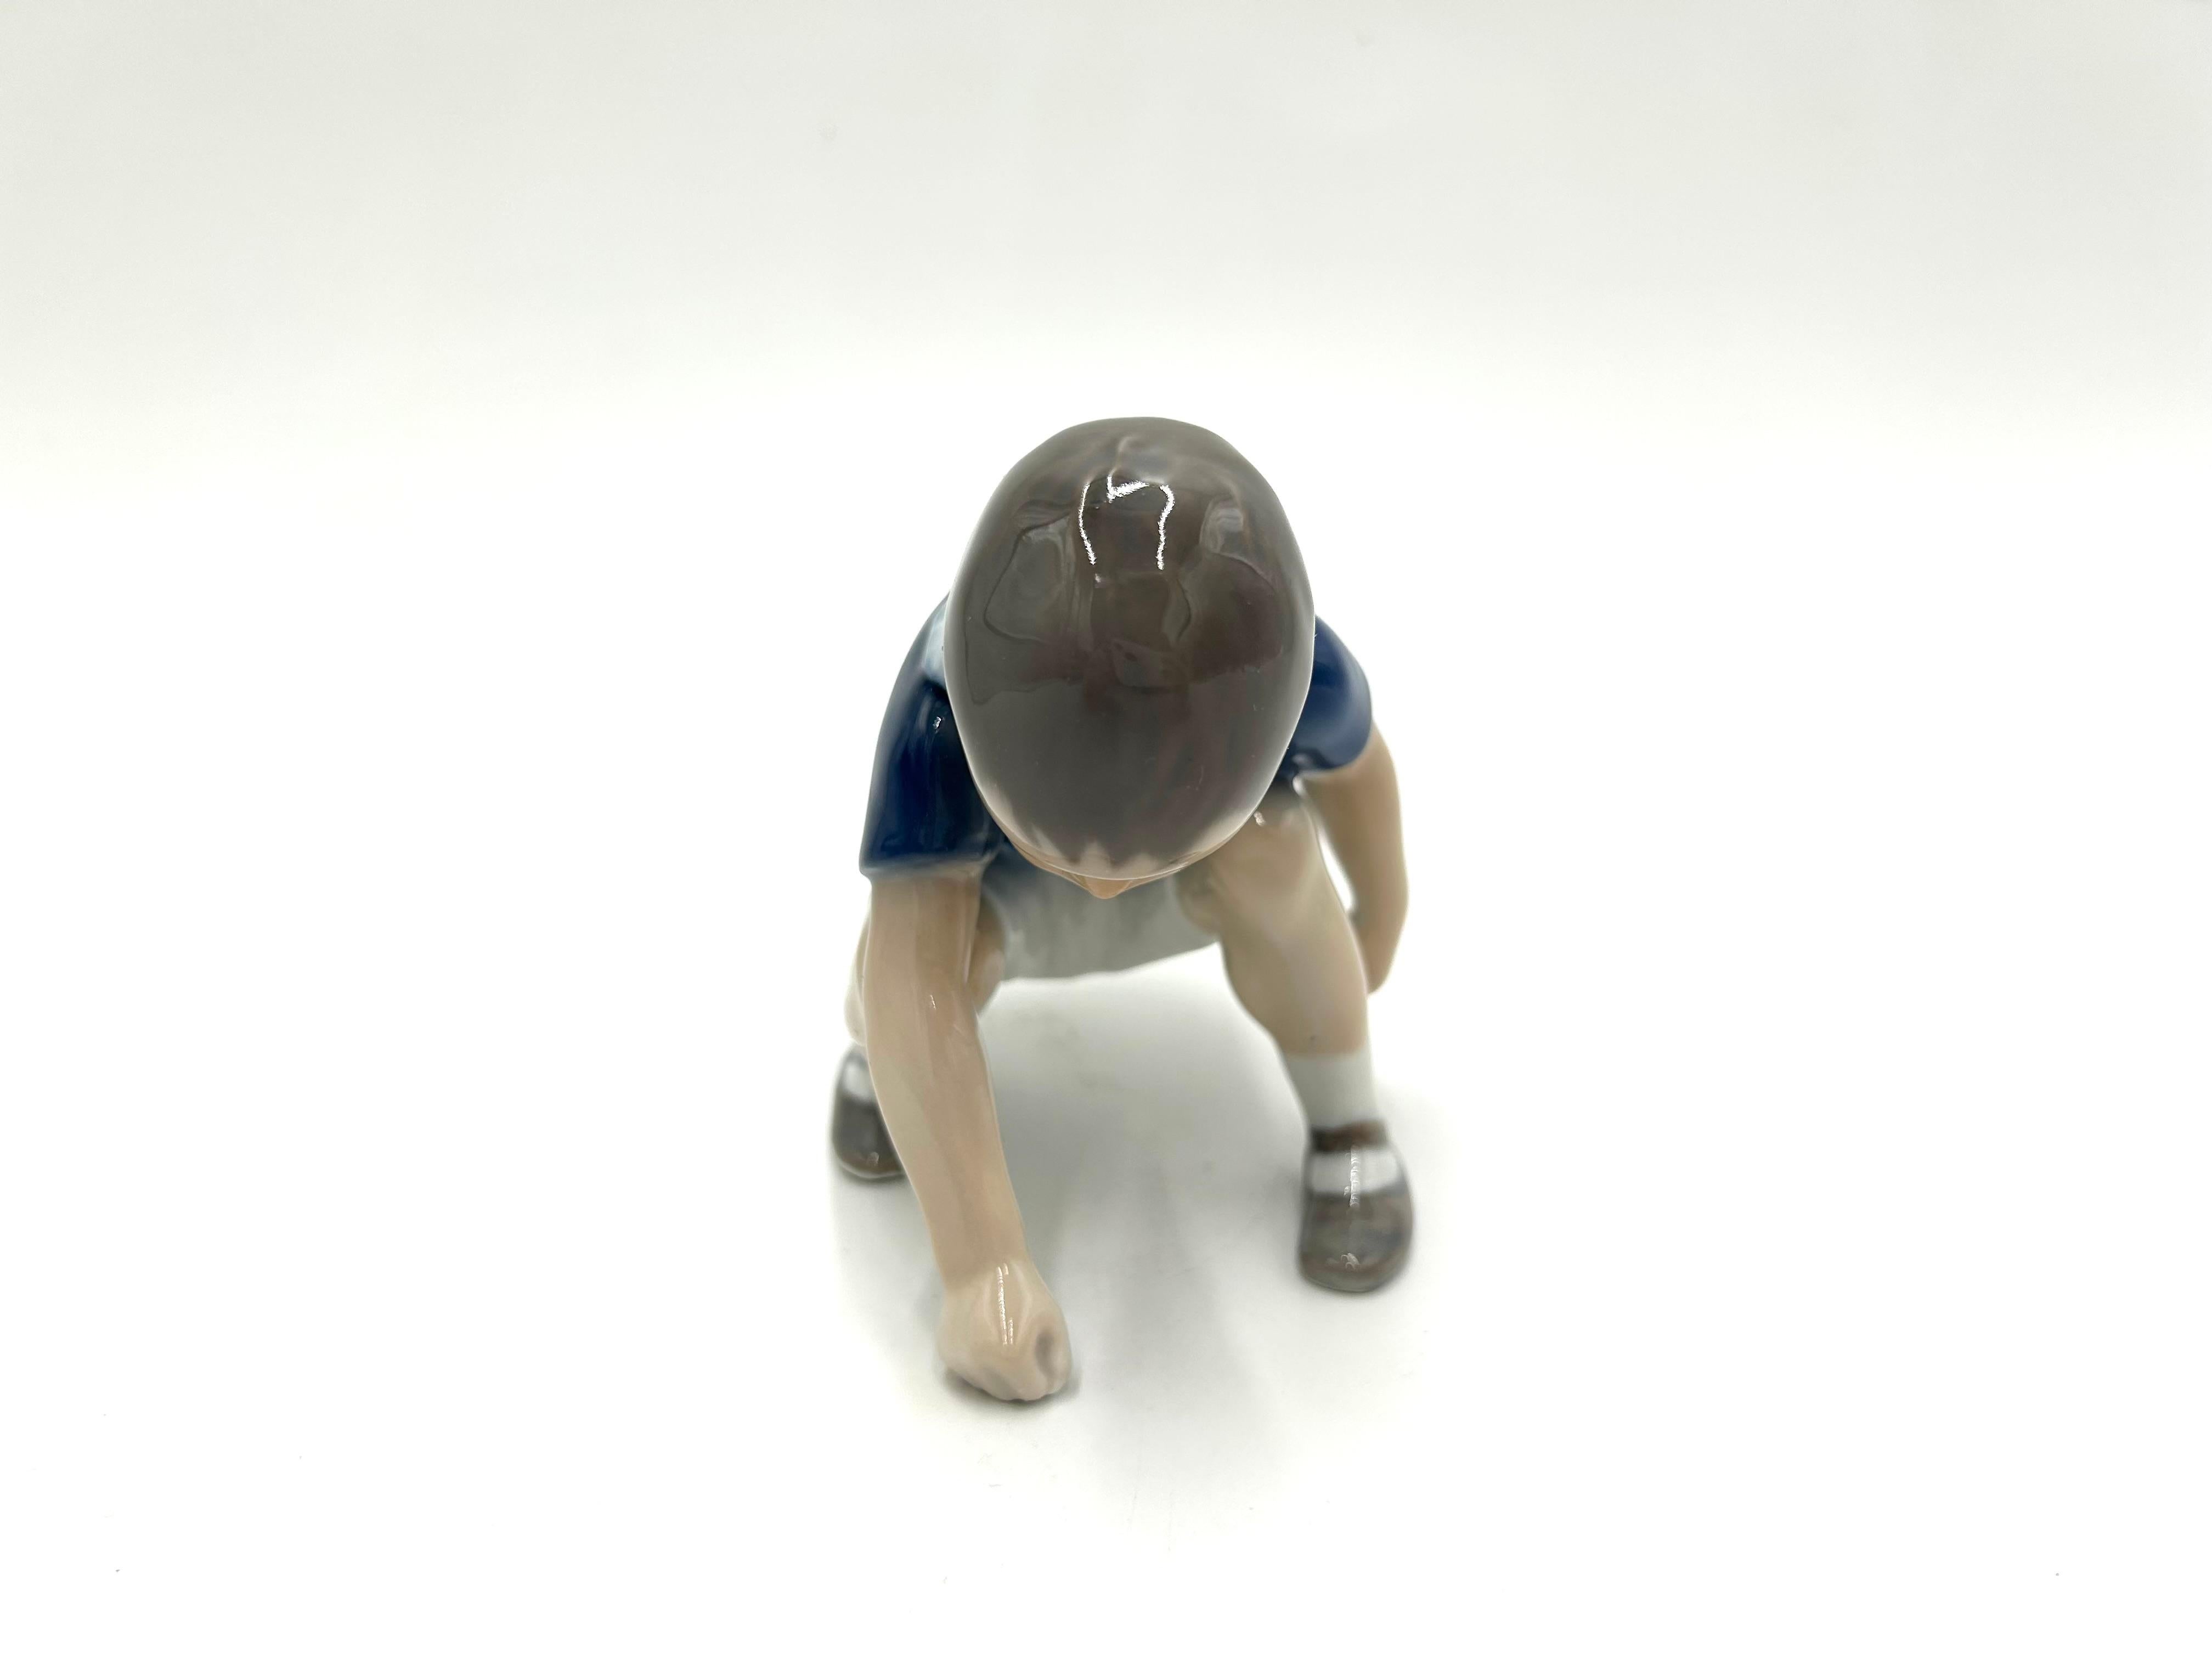 Porcelain figurine of a crouching boy playing

Produced by the Danish manufactory Bing & Grondahl

Signature uses 1985-1991

Very good condition without damage

Measures: height: 10cm

width: 10cm

depth: 10cm.